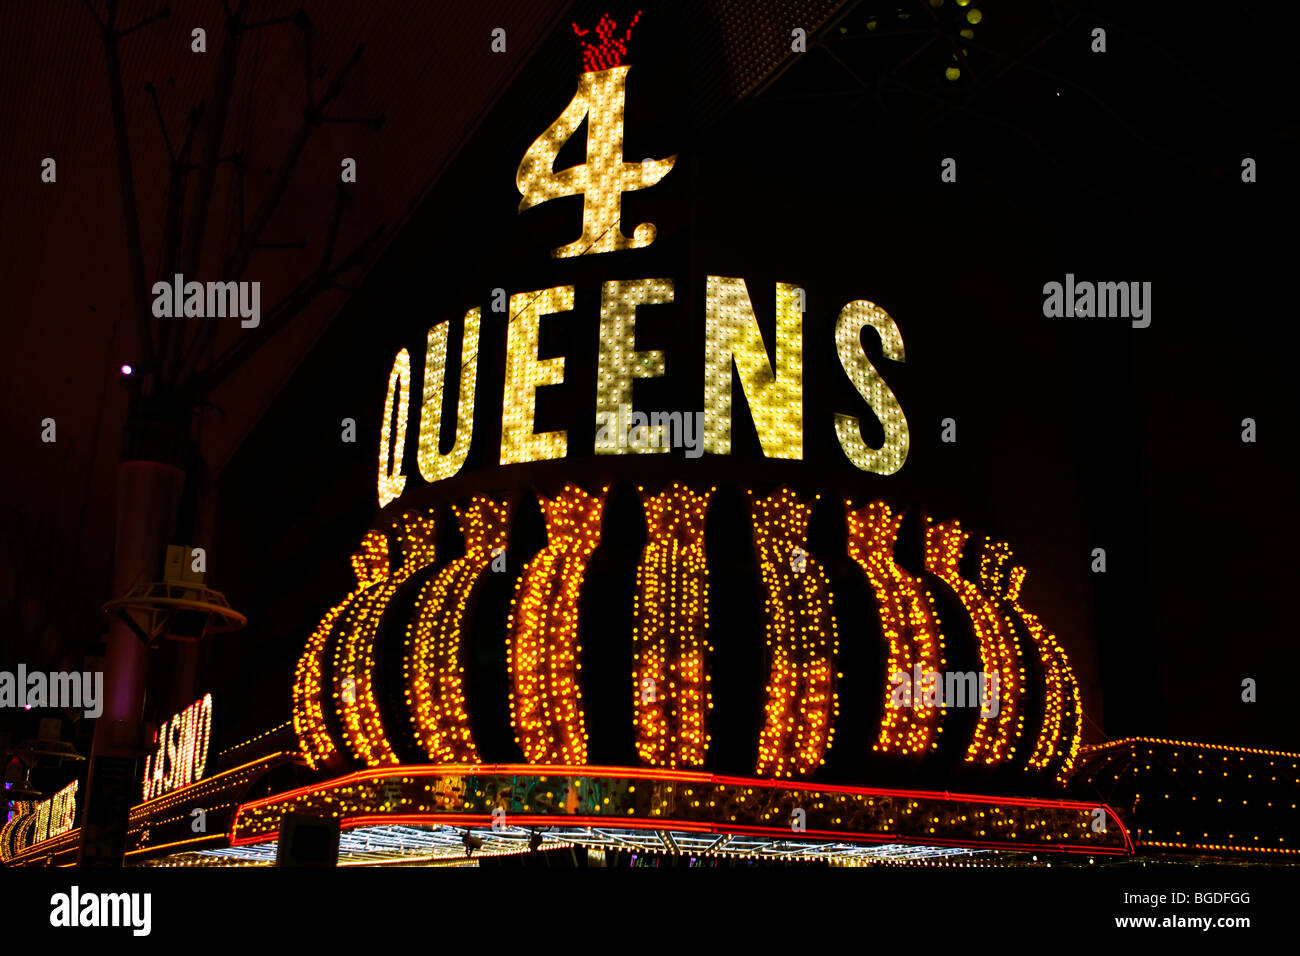 4 Queens in Fremont Street in old Las Vegas, Nevada, USA Stock Photo